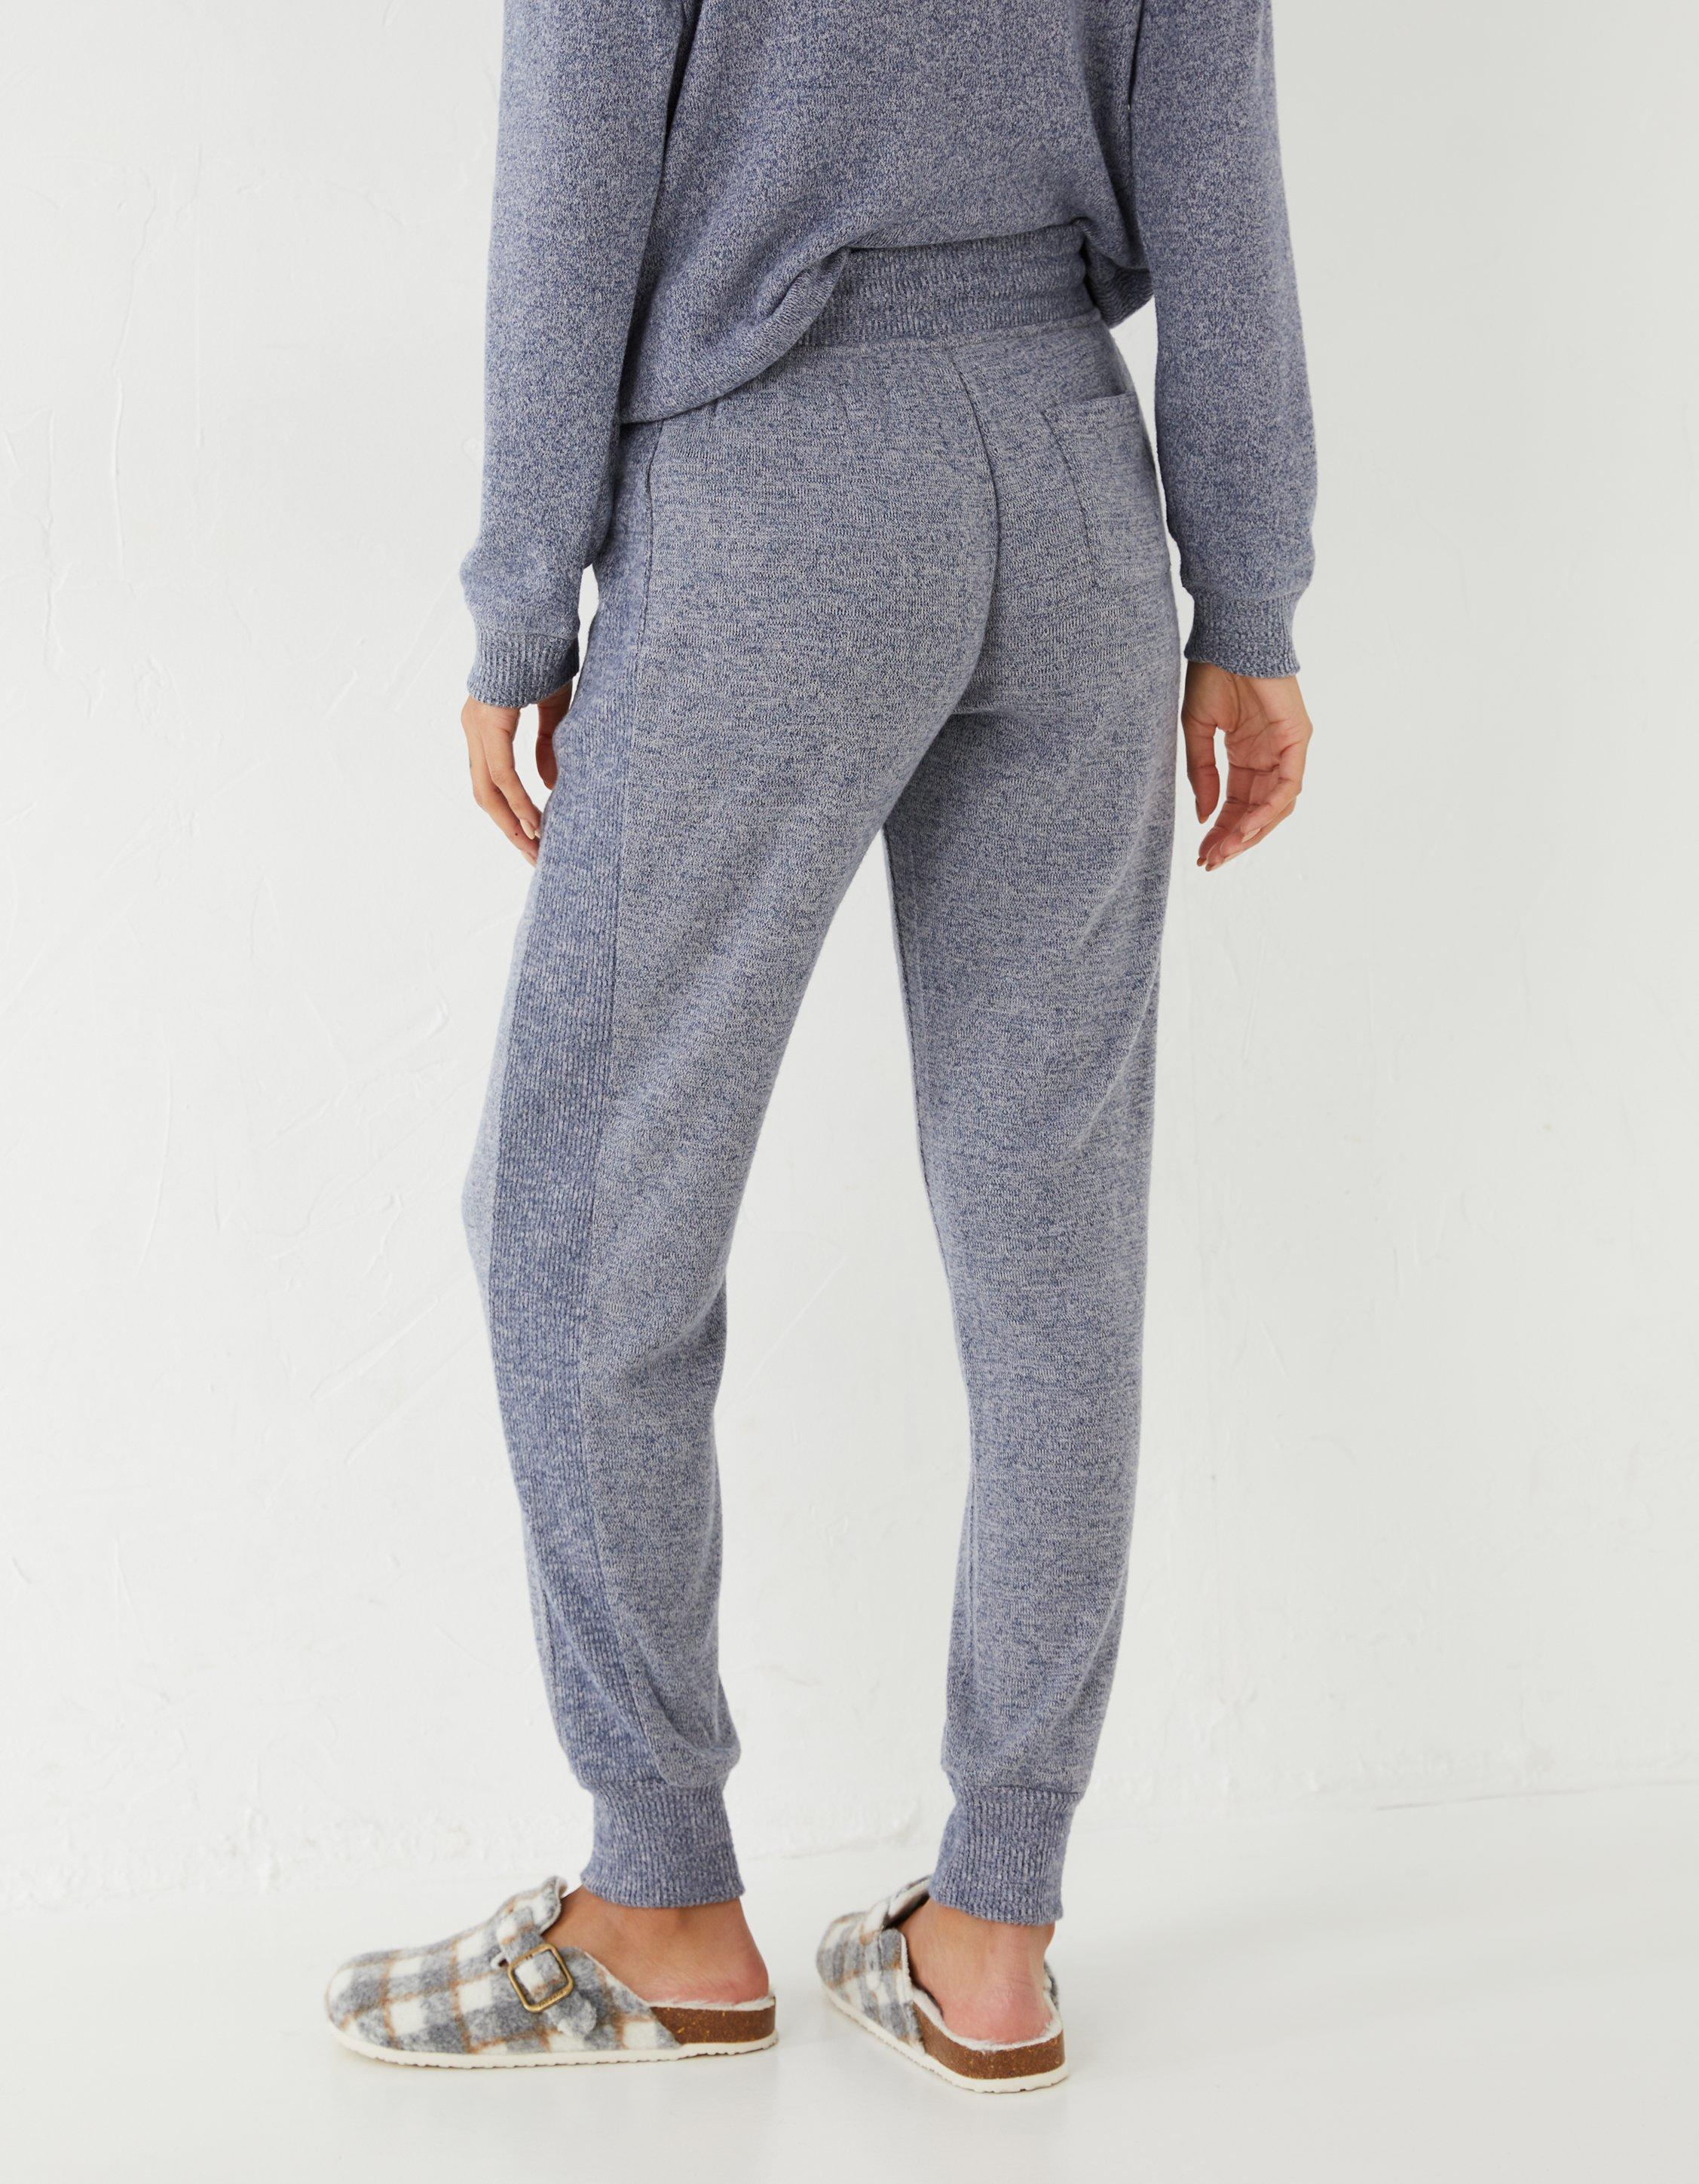 FAT FACE Womens Tracksuit Trousers Joggers UK 18 XL Grey Polyester, Vintage & Second-Hand Clothing Online